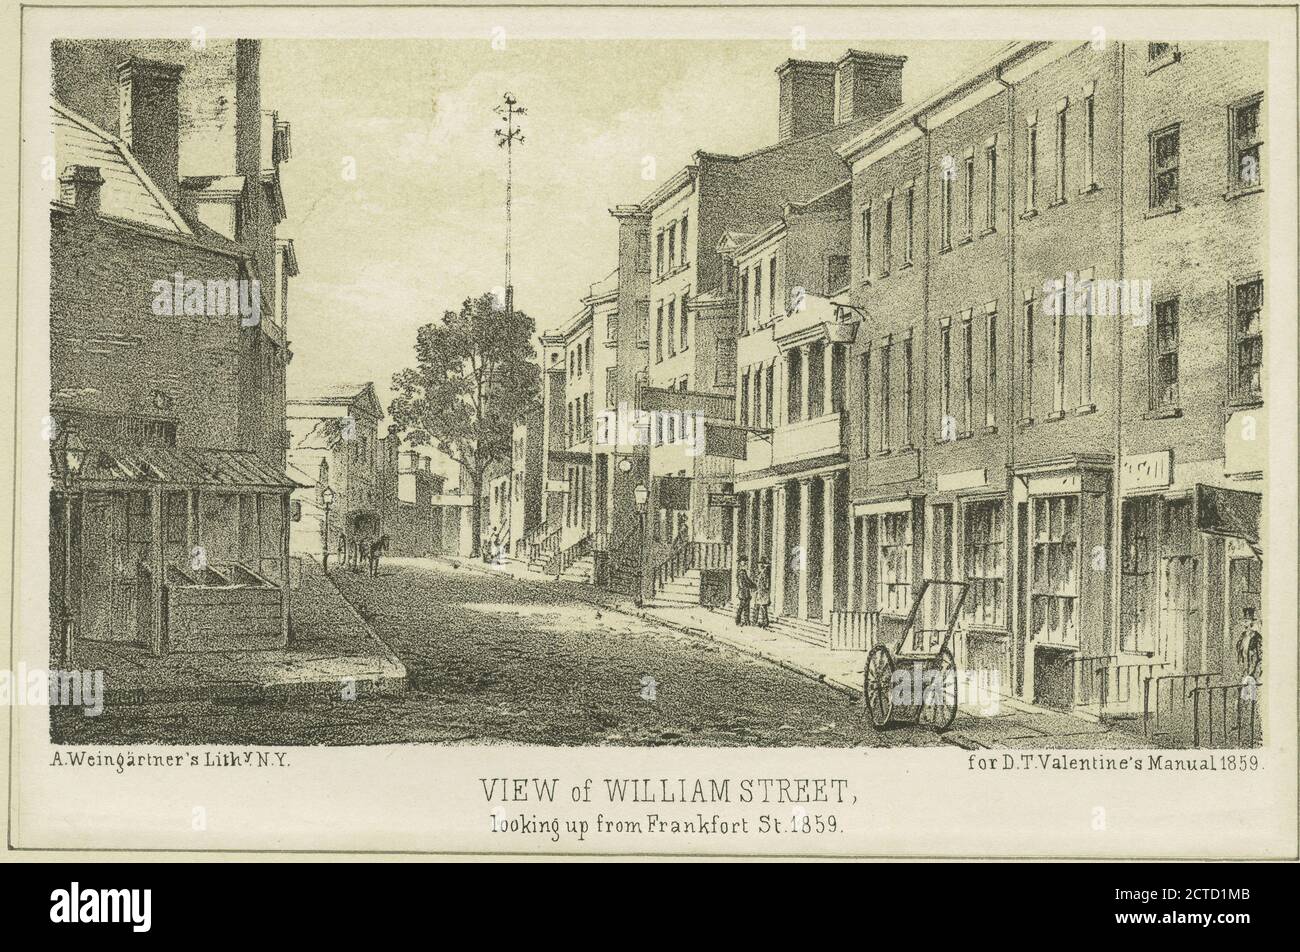 Old house in William St. betw. Fulton & John St. 1861; View of William Street loking up from Frankfort St. 1859, still image, Prints, 1828 - 1890 Stock Photo